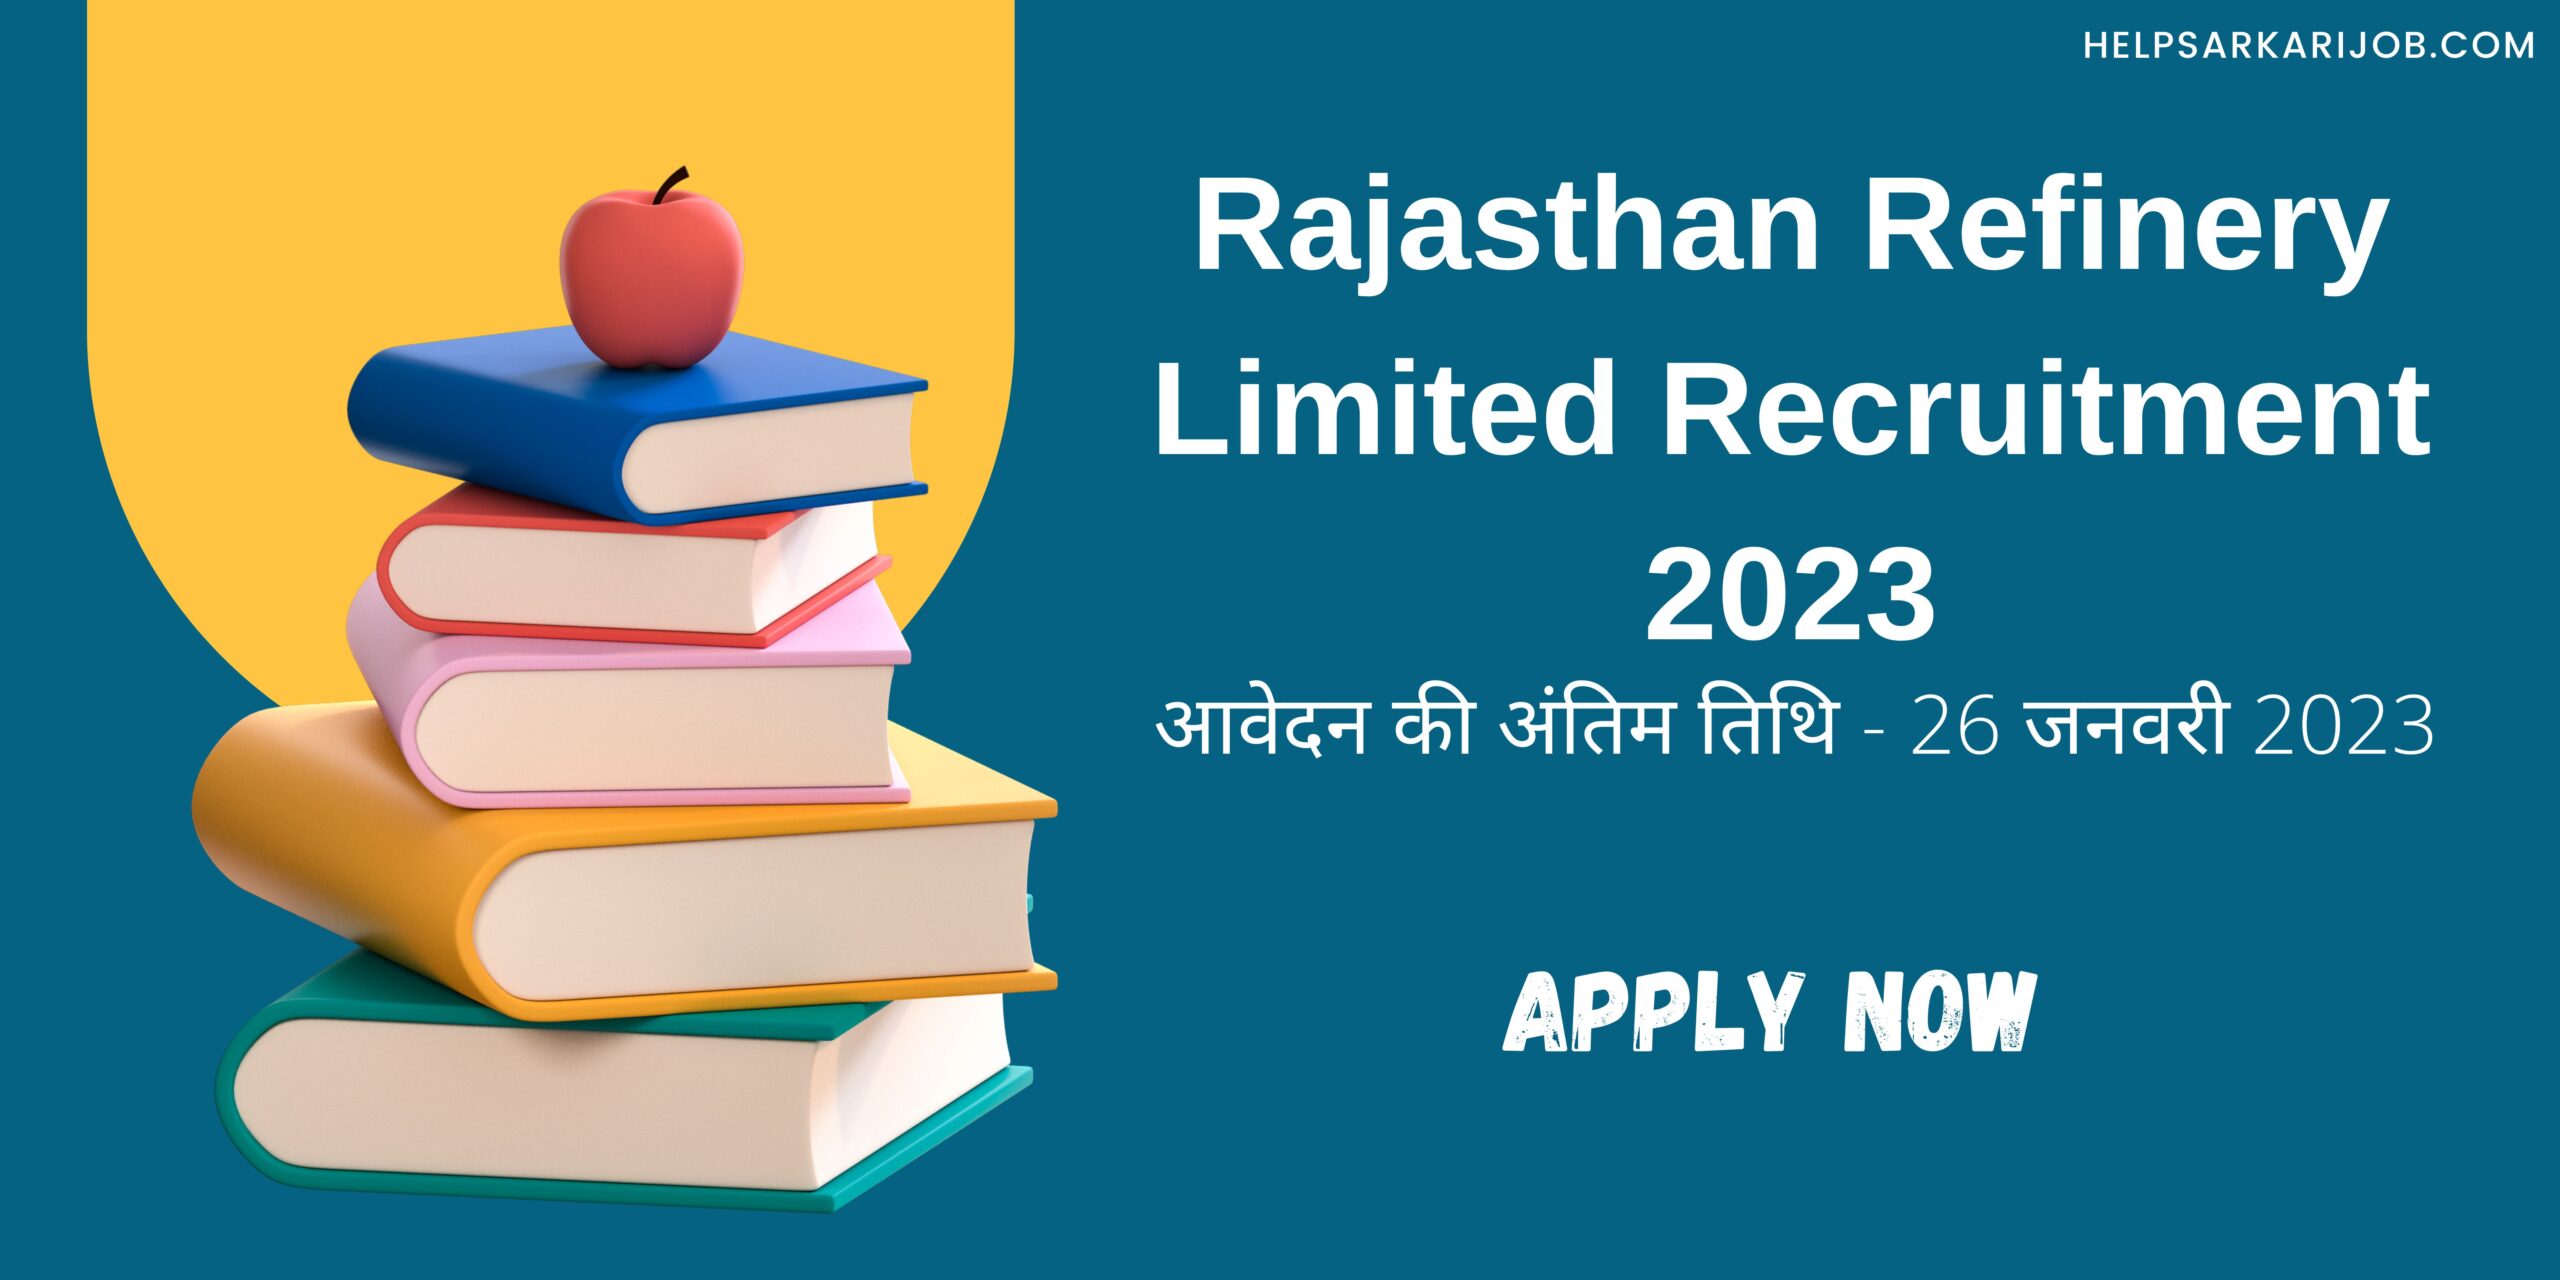 Rajasthan Refinery Limited Recruitment 2023